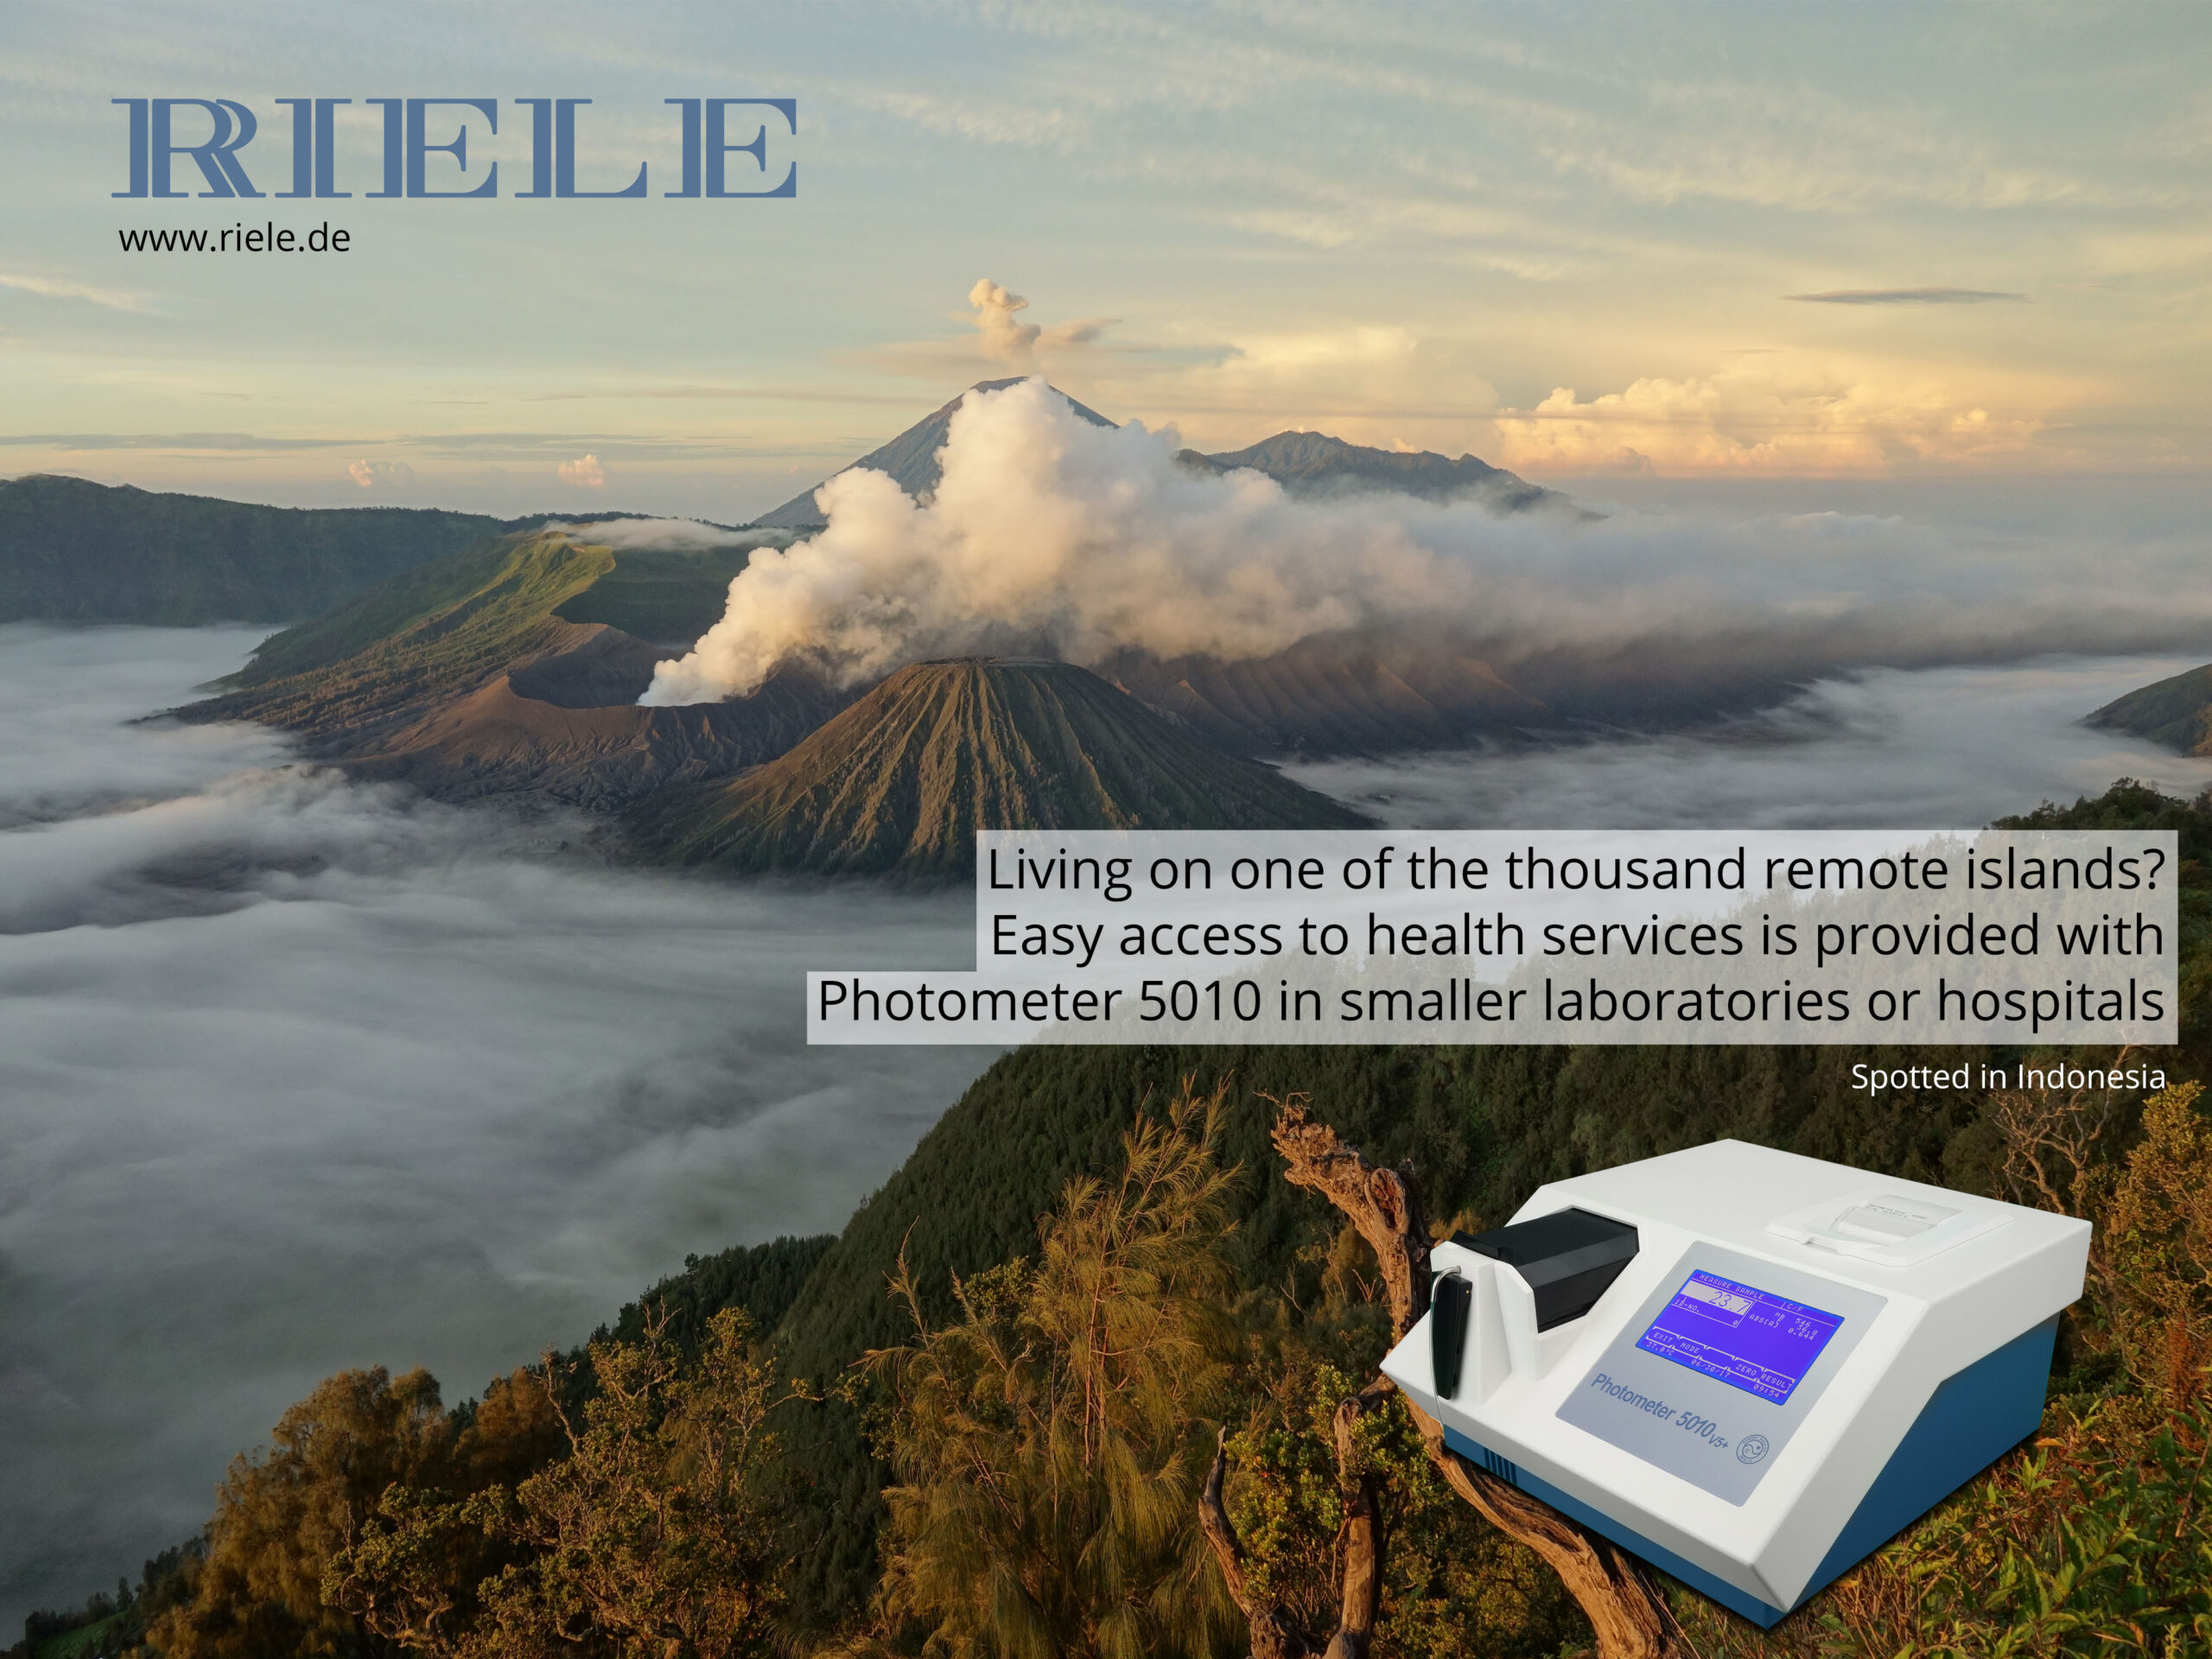 Photometer 5010 in Indonesia